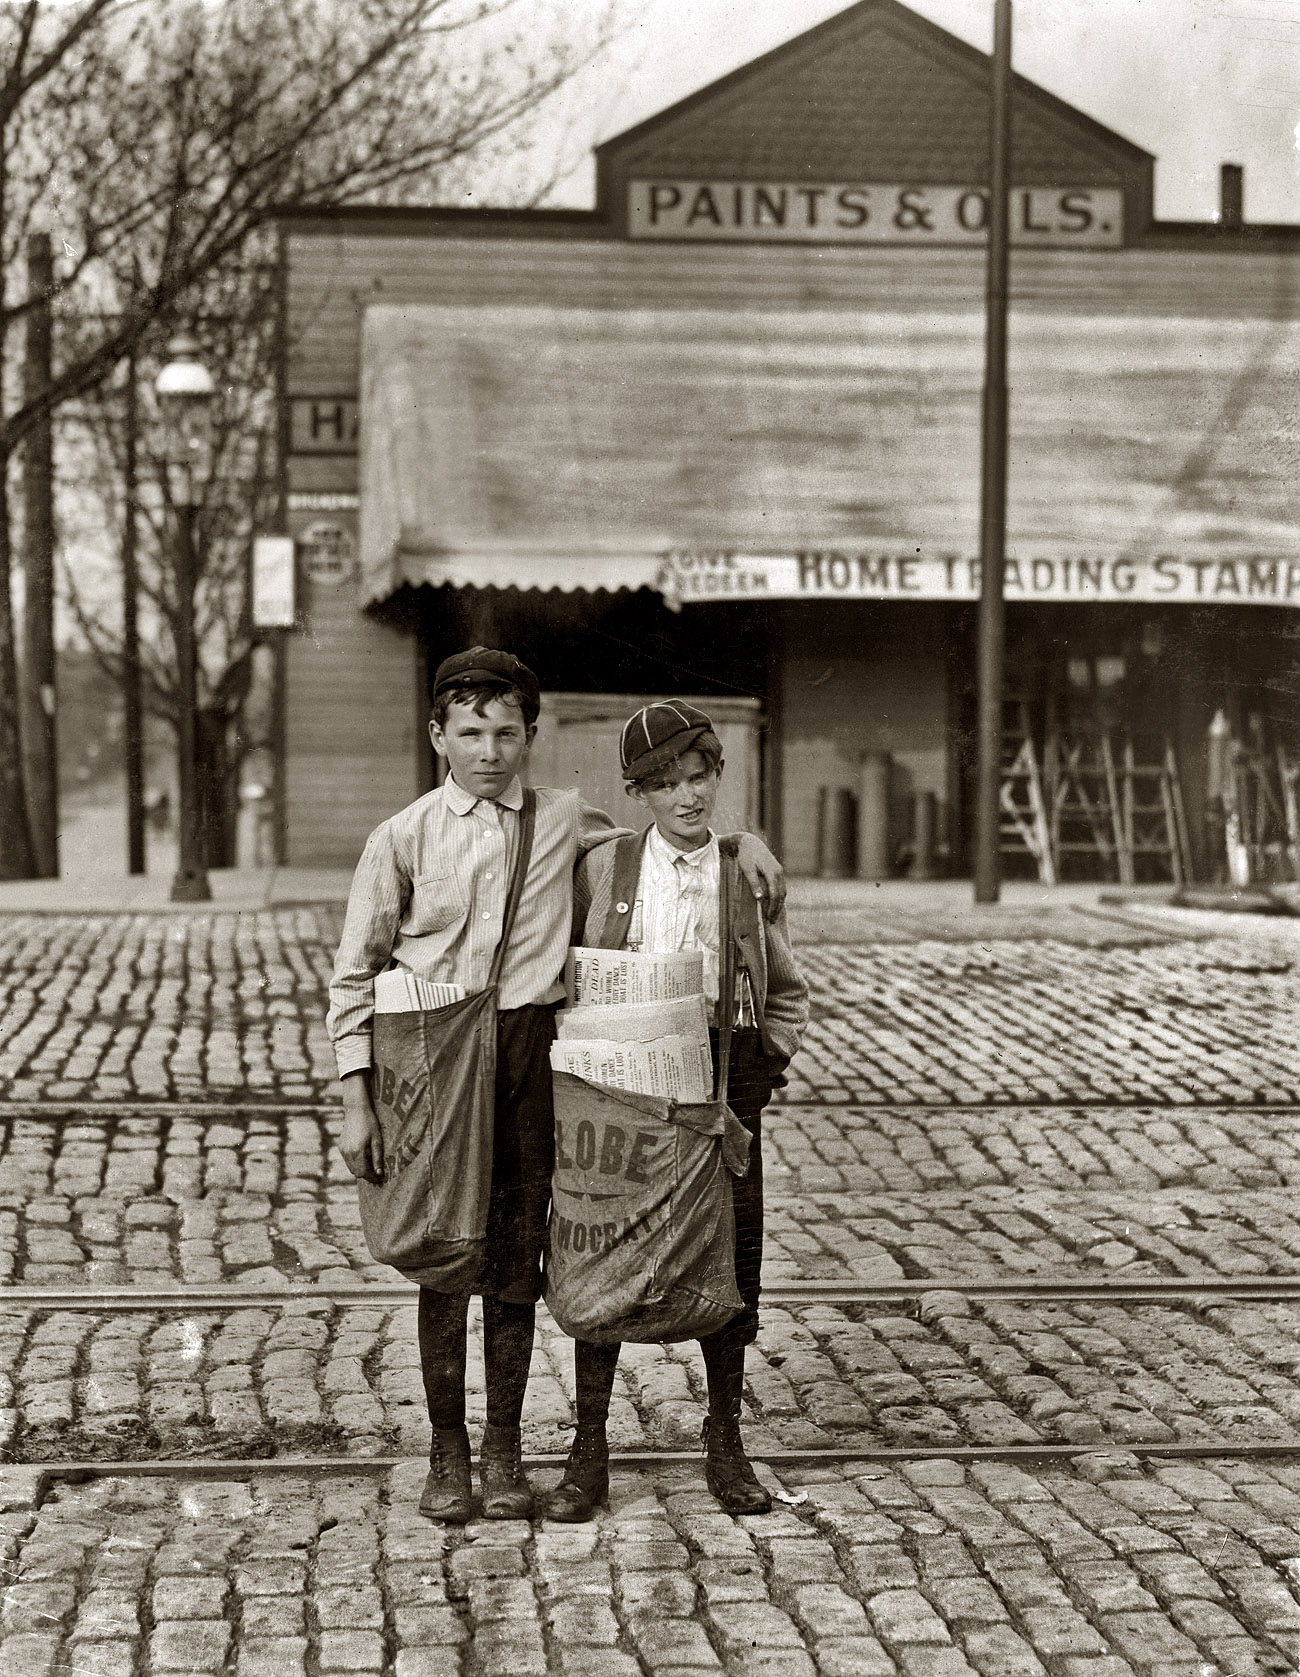 St. Louis, May 1910. "The boy on the right, nicknamed Turk, said he was going to Texas soon. The investigator found him recently with $1.75 he had just won at craps." The same boys seen here. Photo by Lewis Wickes Hine. View full size.